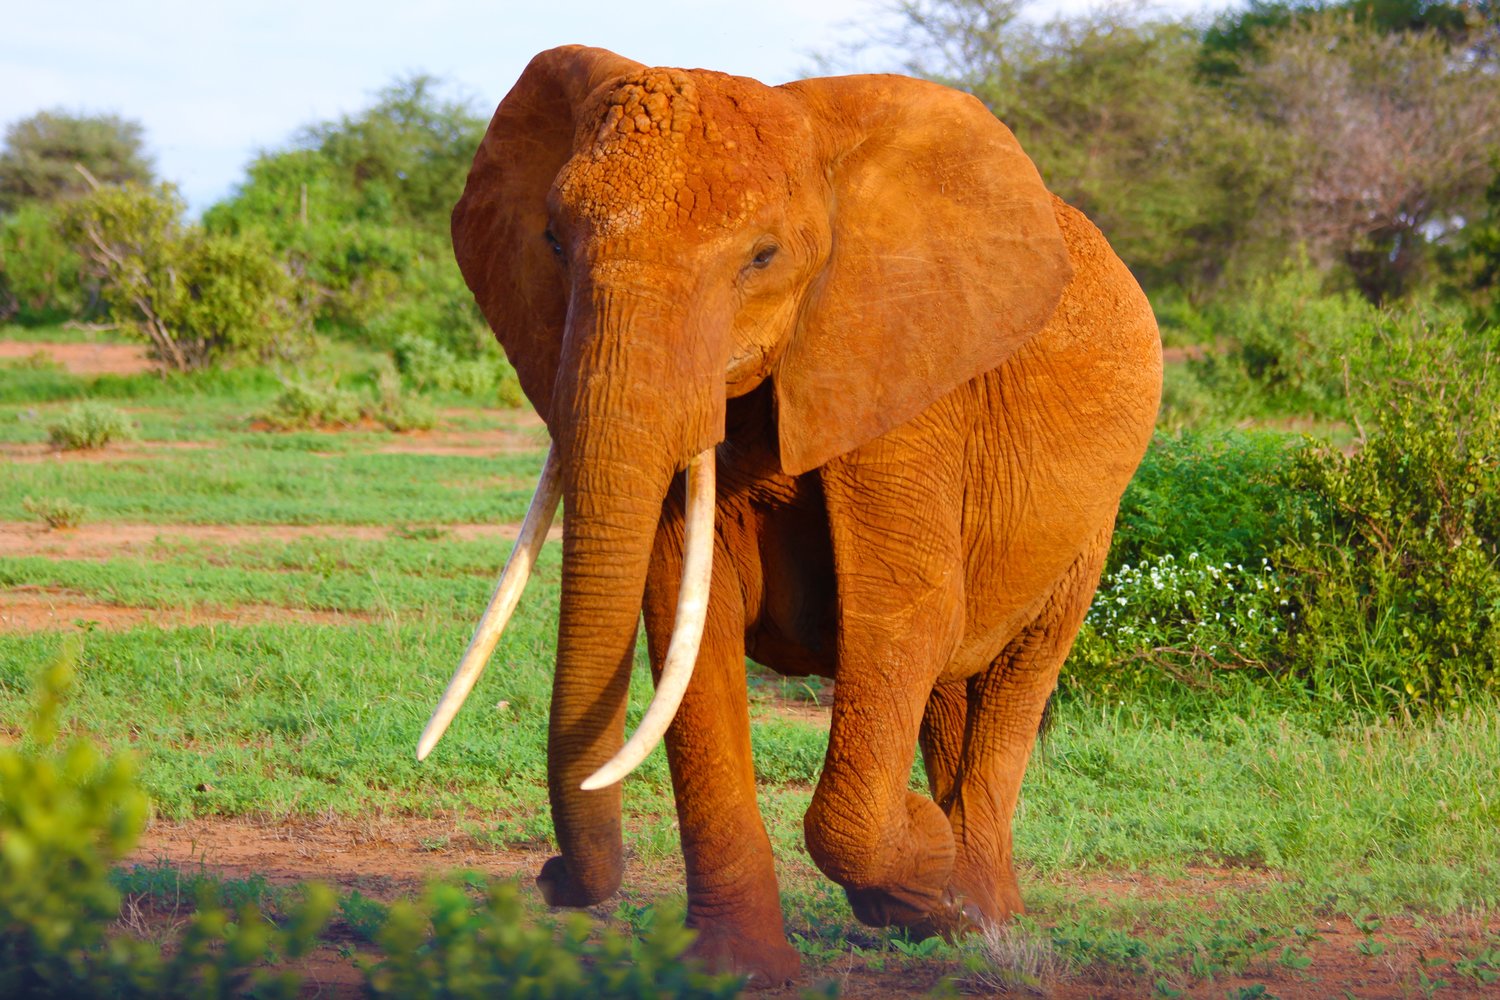 African elephants cover themselves in red mud to prevent their body from taking in too much sunlight.